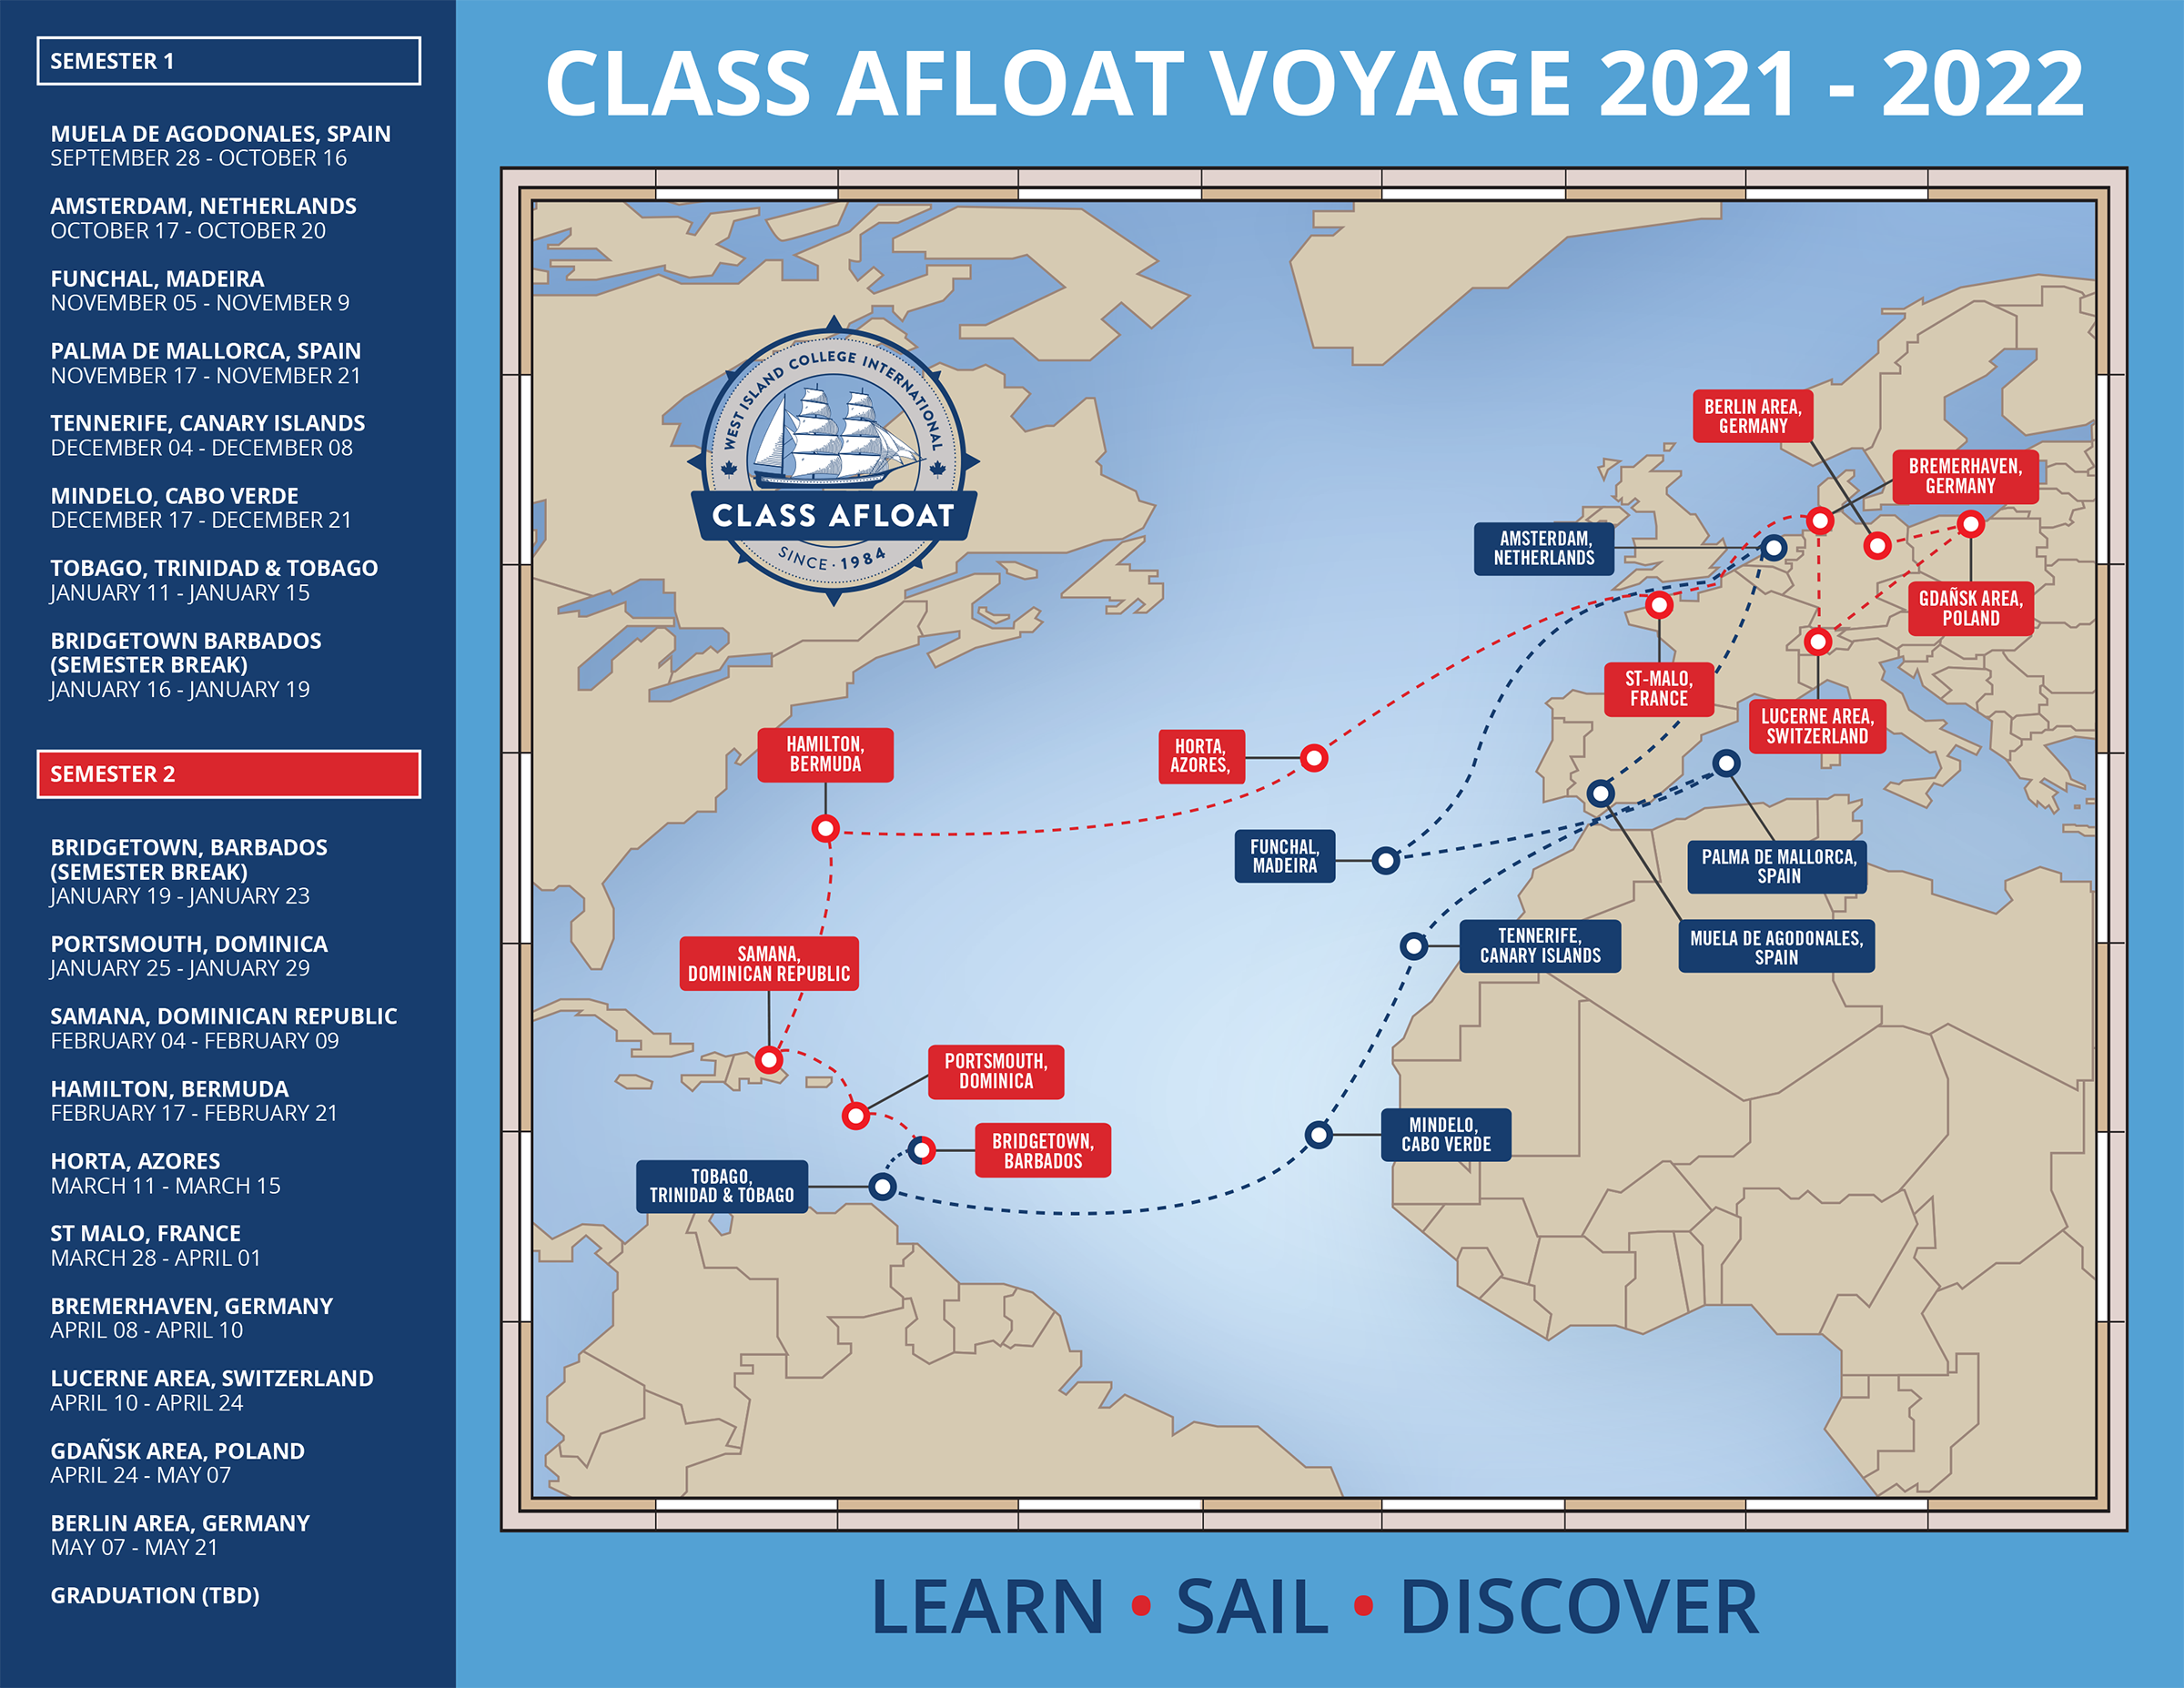 Class Afload Itinerary 2021-2022